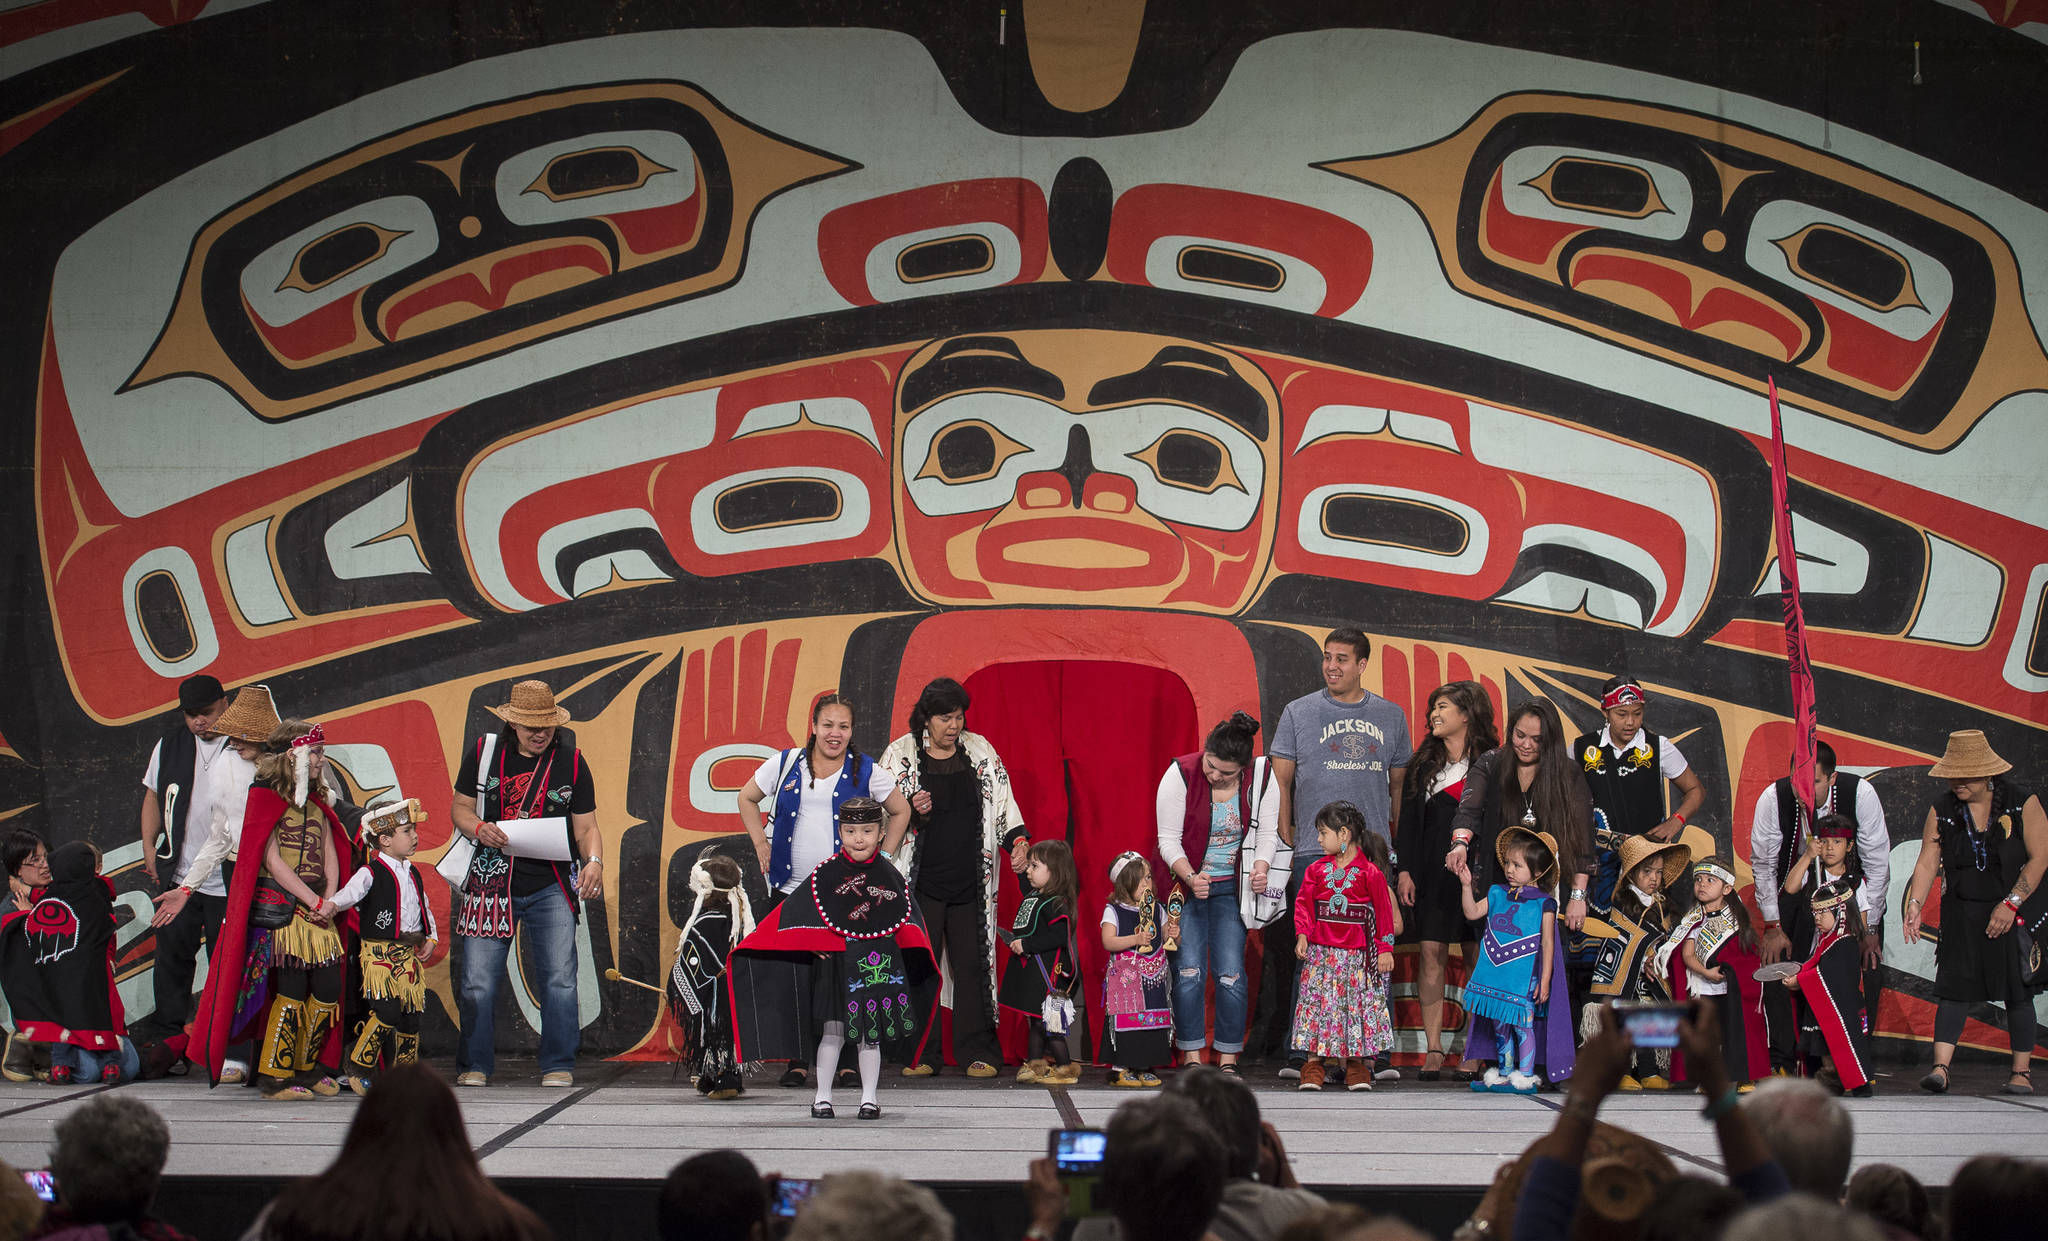 Children and their parents participate in the Toddler Fashion Show on the main stage at Centennial Hall for Celebration 2018 on Friday, June 8, 2018. (Michael Penn | Juneau Empire)